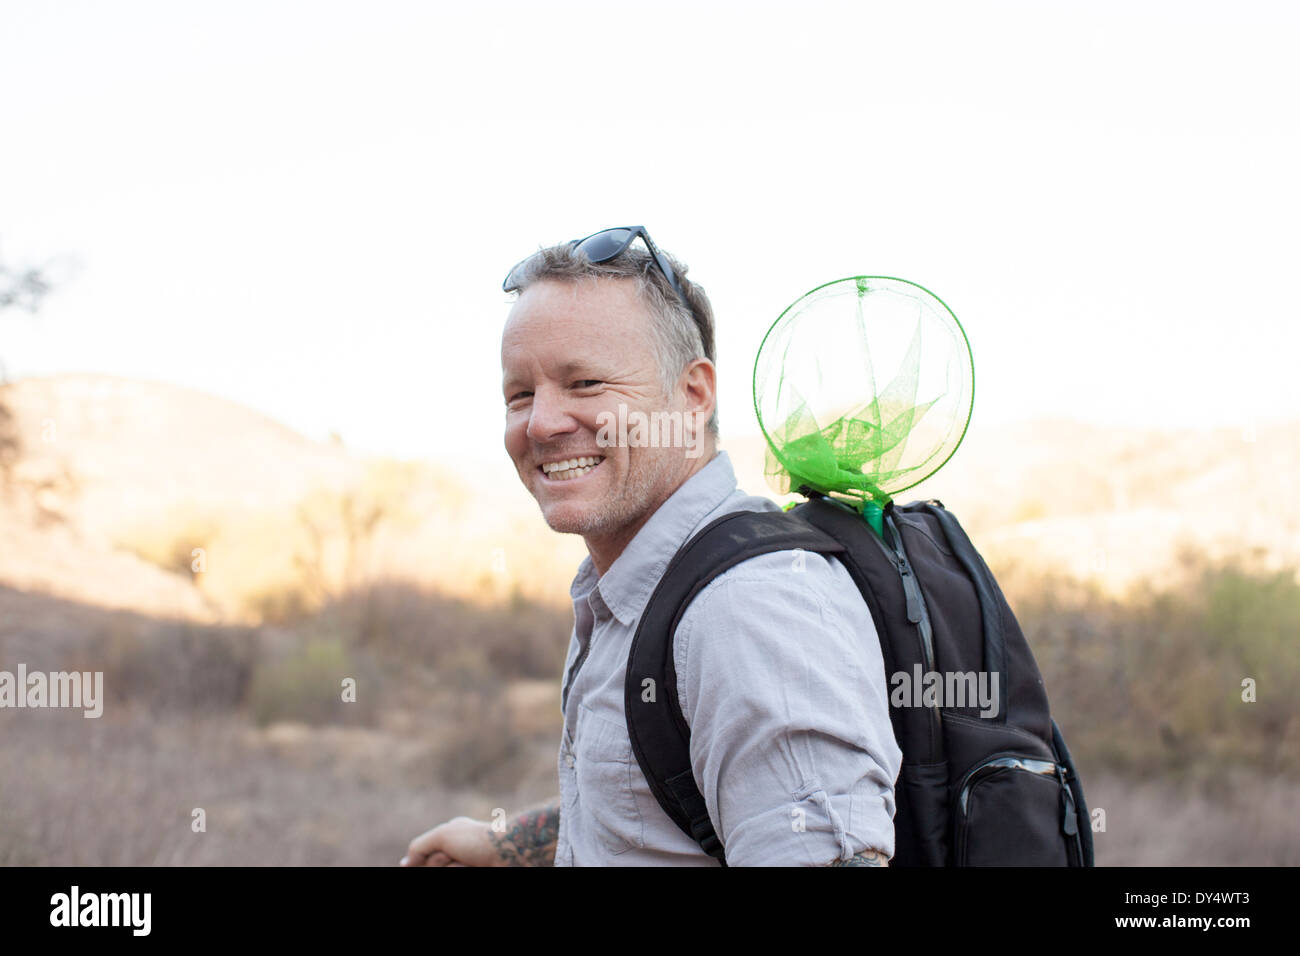 Candid portrait of smiling male hiker Stock Photo